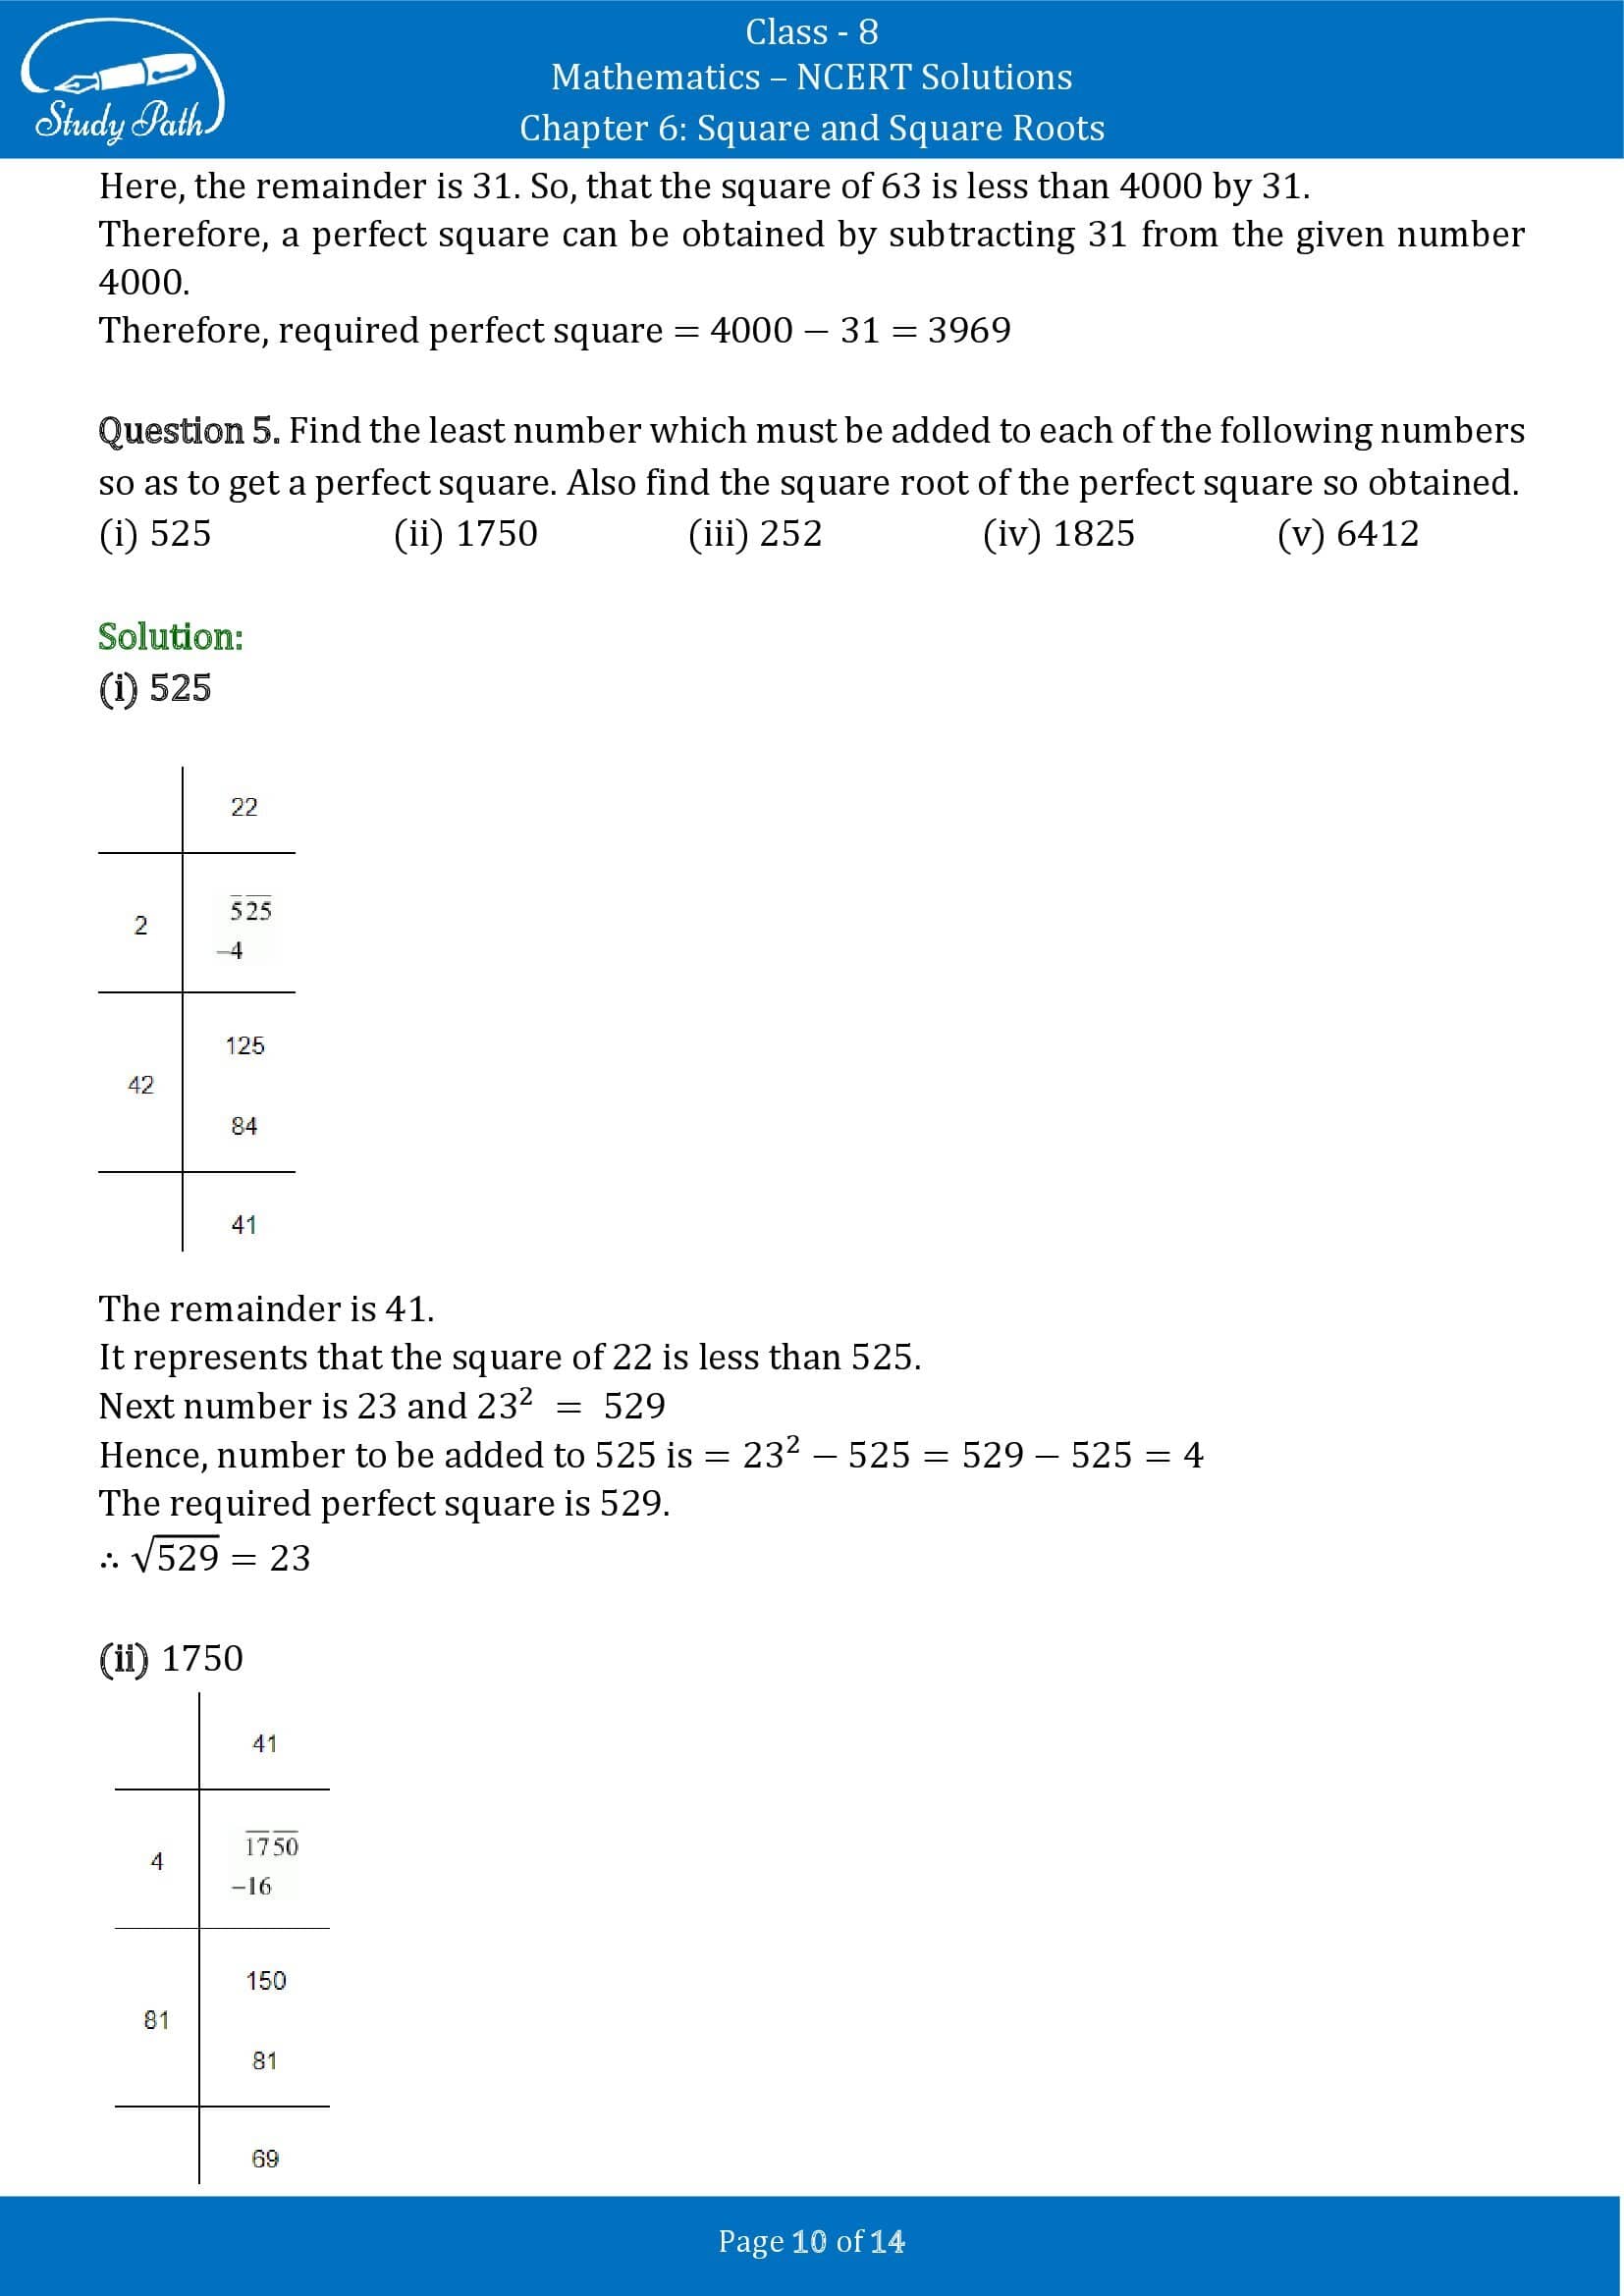 NCERT Solutions for Class 8 Maths Chapter 6 Square and Square Roots Exercise 6.4 00010